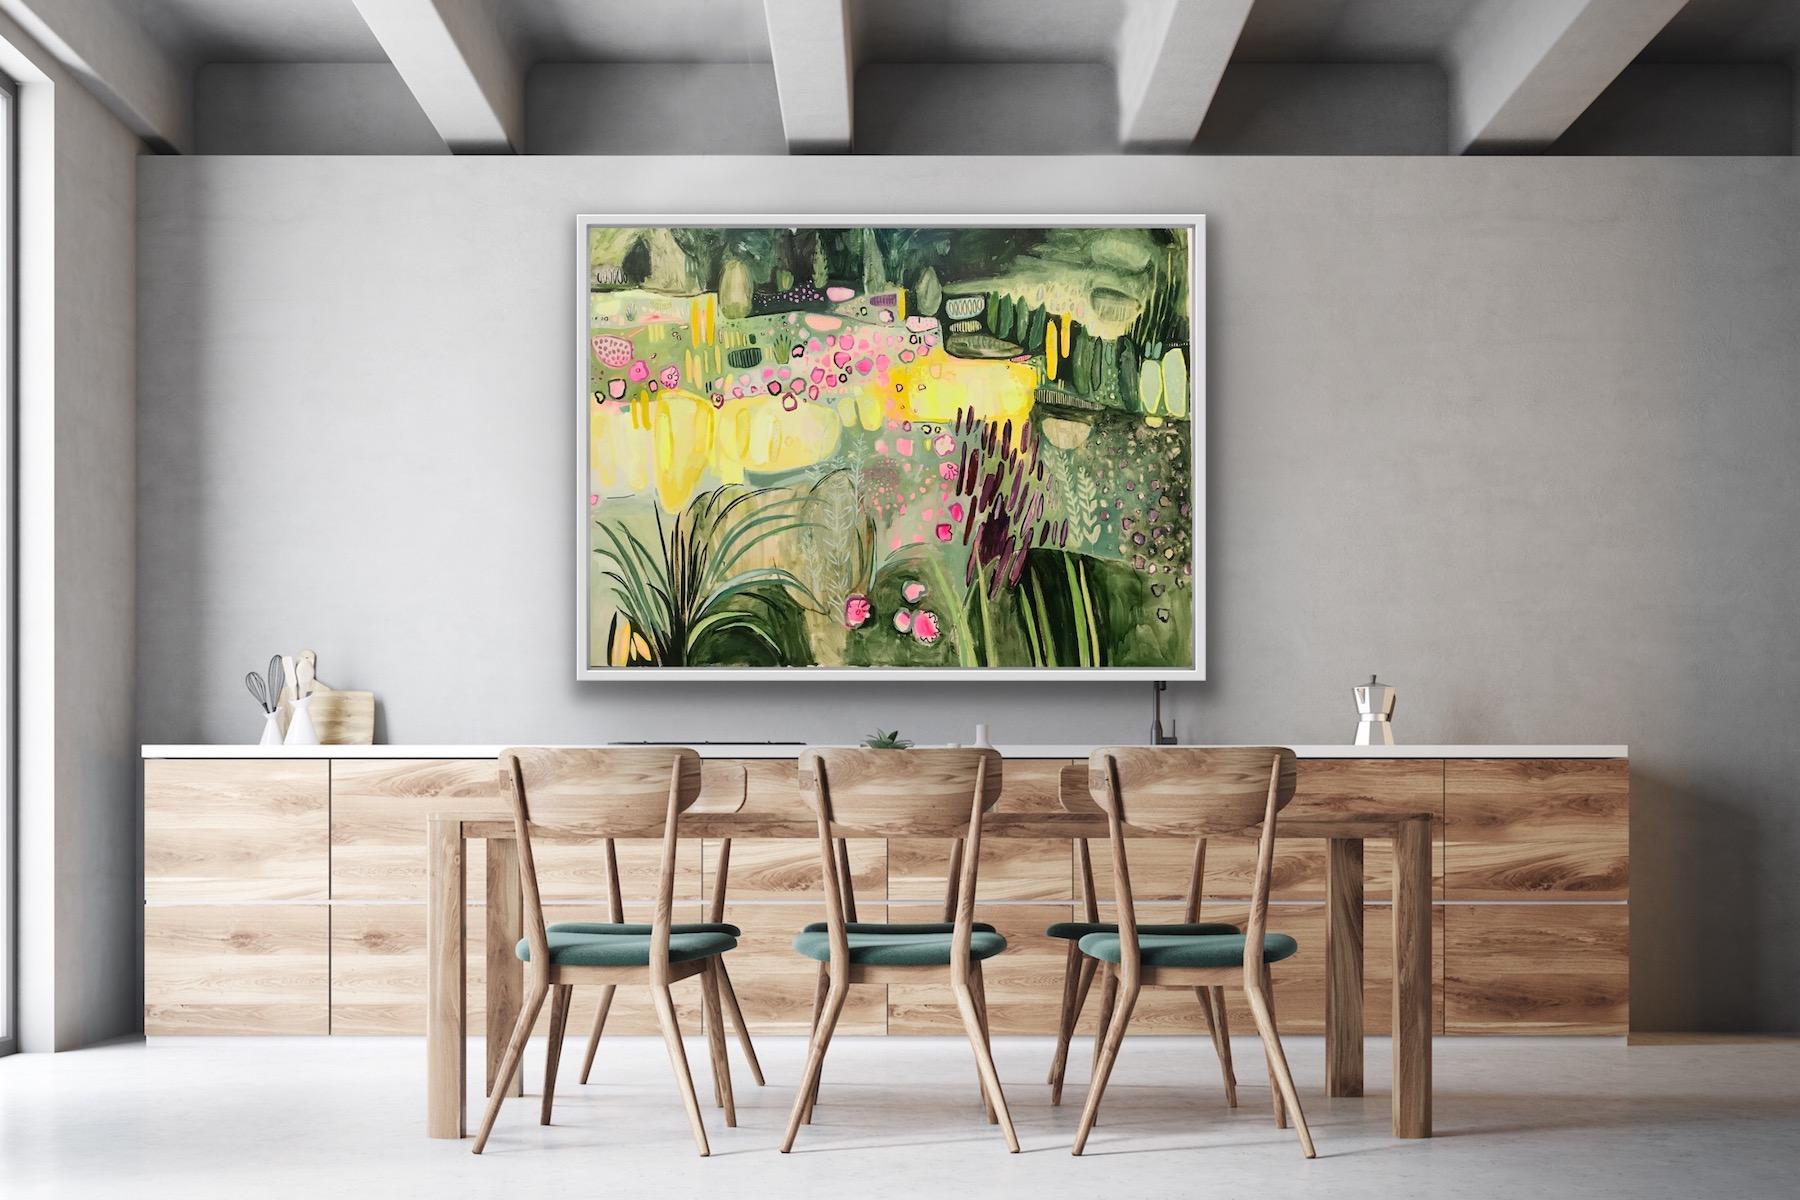 Large Merton Beds 4, Oxford Art, Semi Abstract Style Floral Painting, Statement For Sale 4